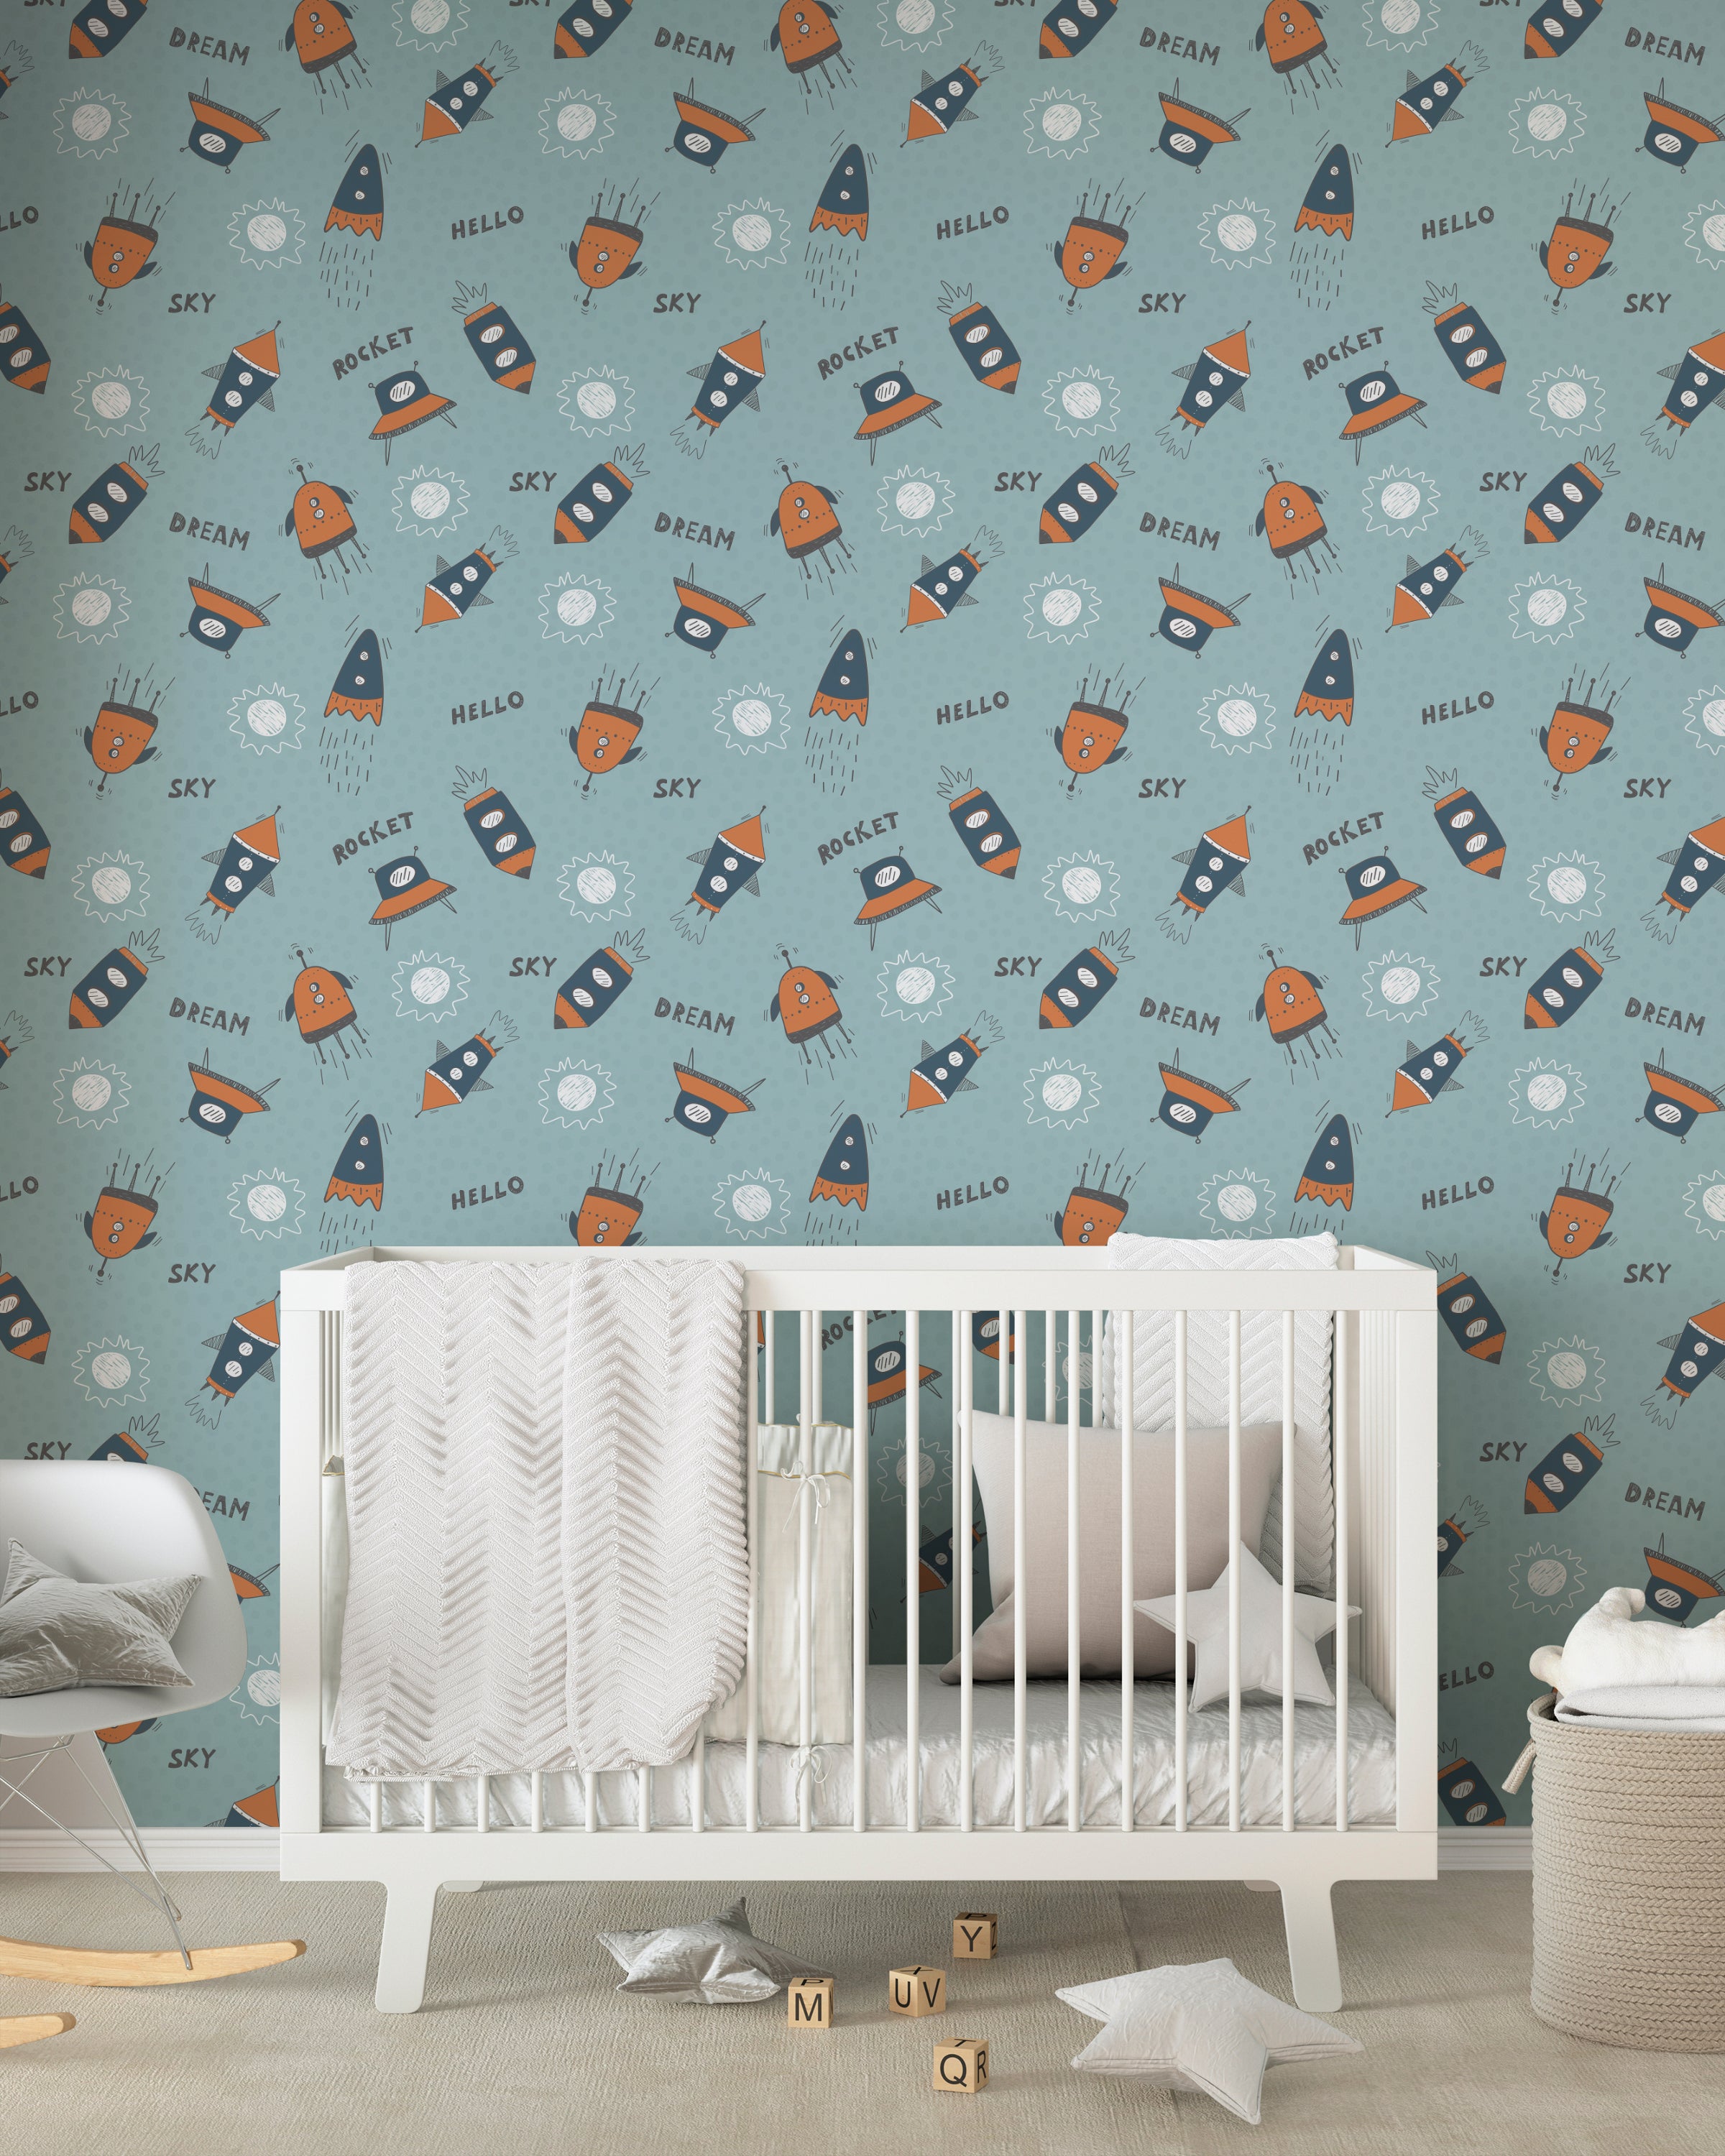 Nursery room with 'Hello Sky Dream' wallpaper, light blue balloons, a white crib, and a cozy blanket creating an imaginative space theme